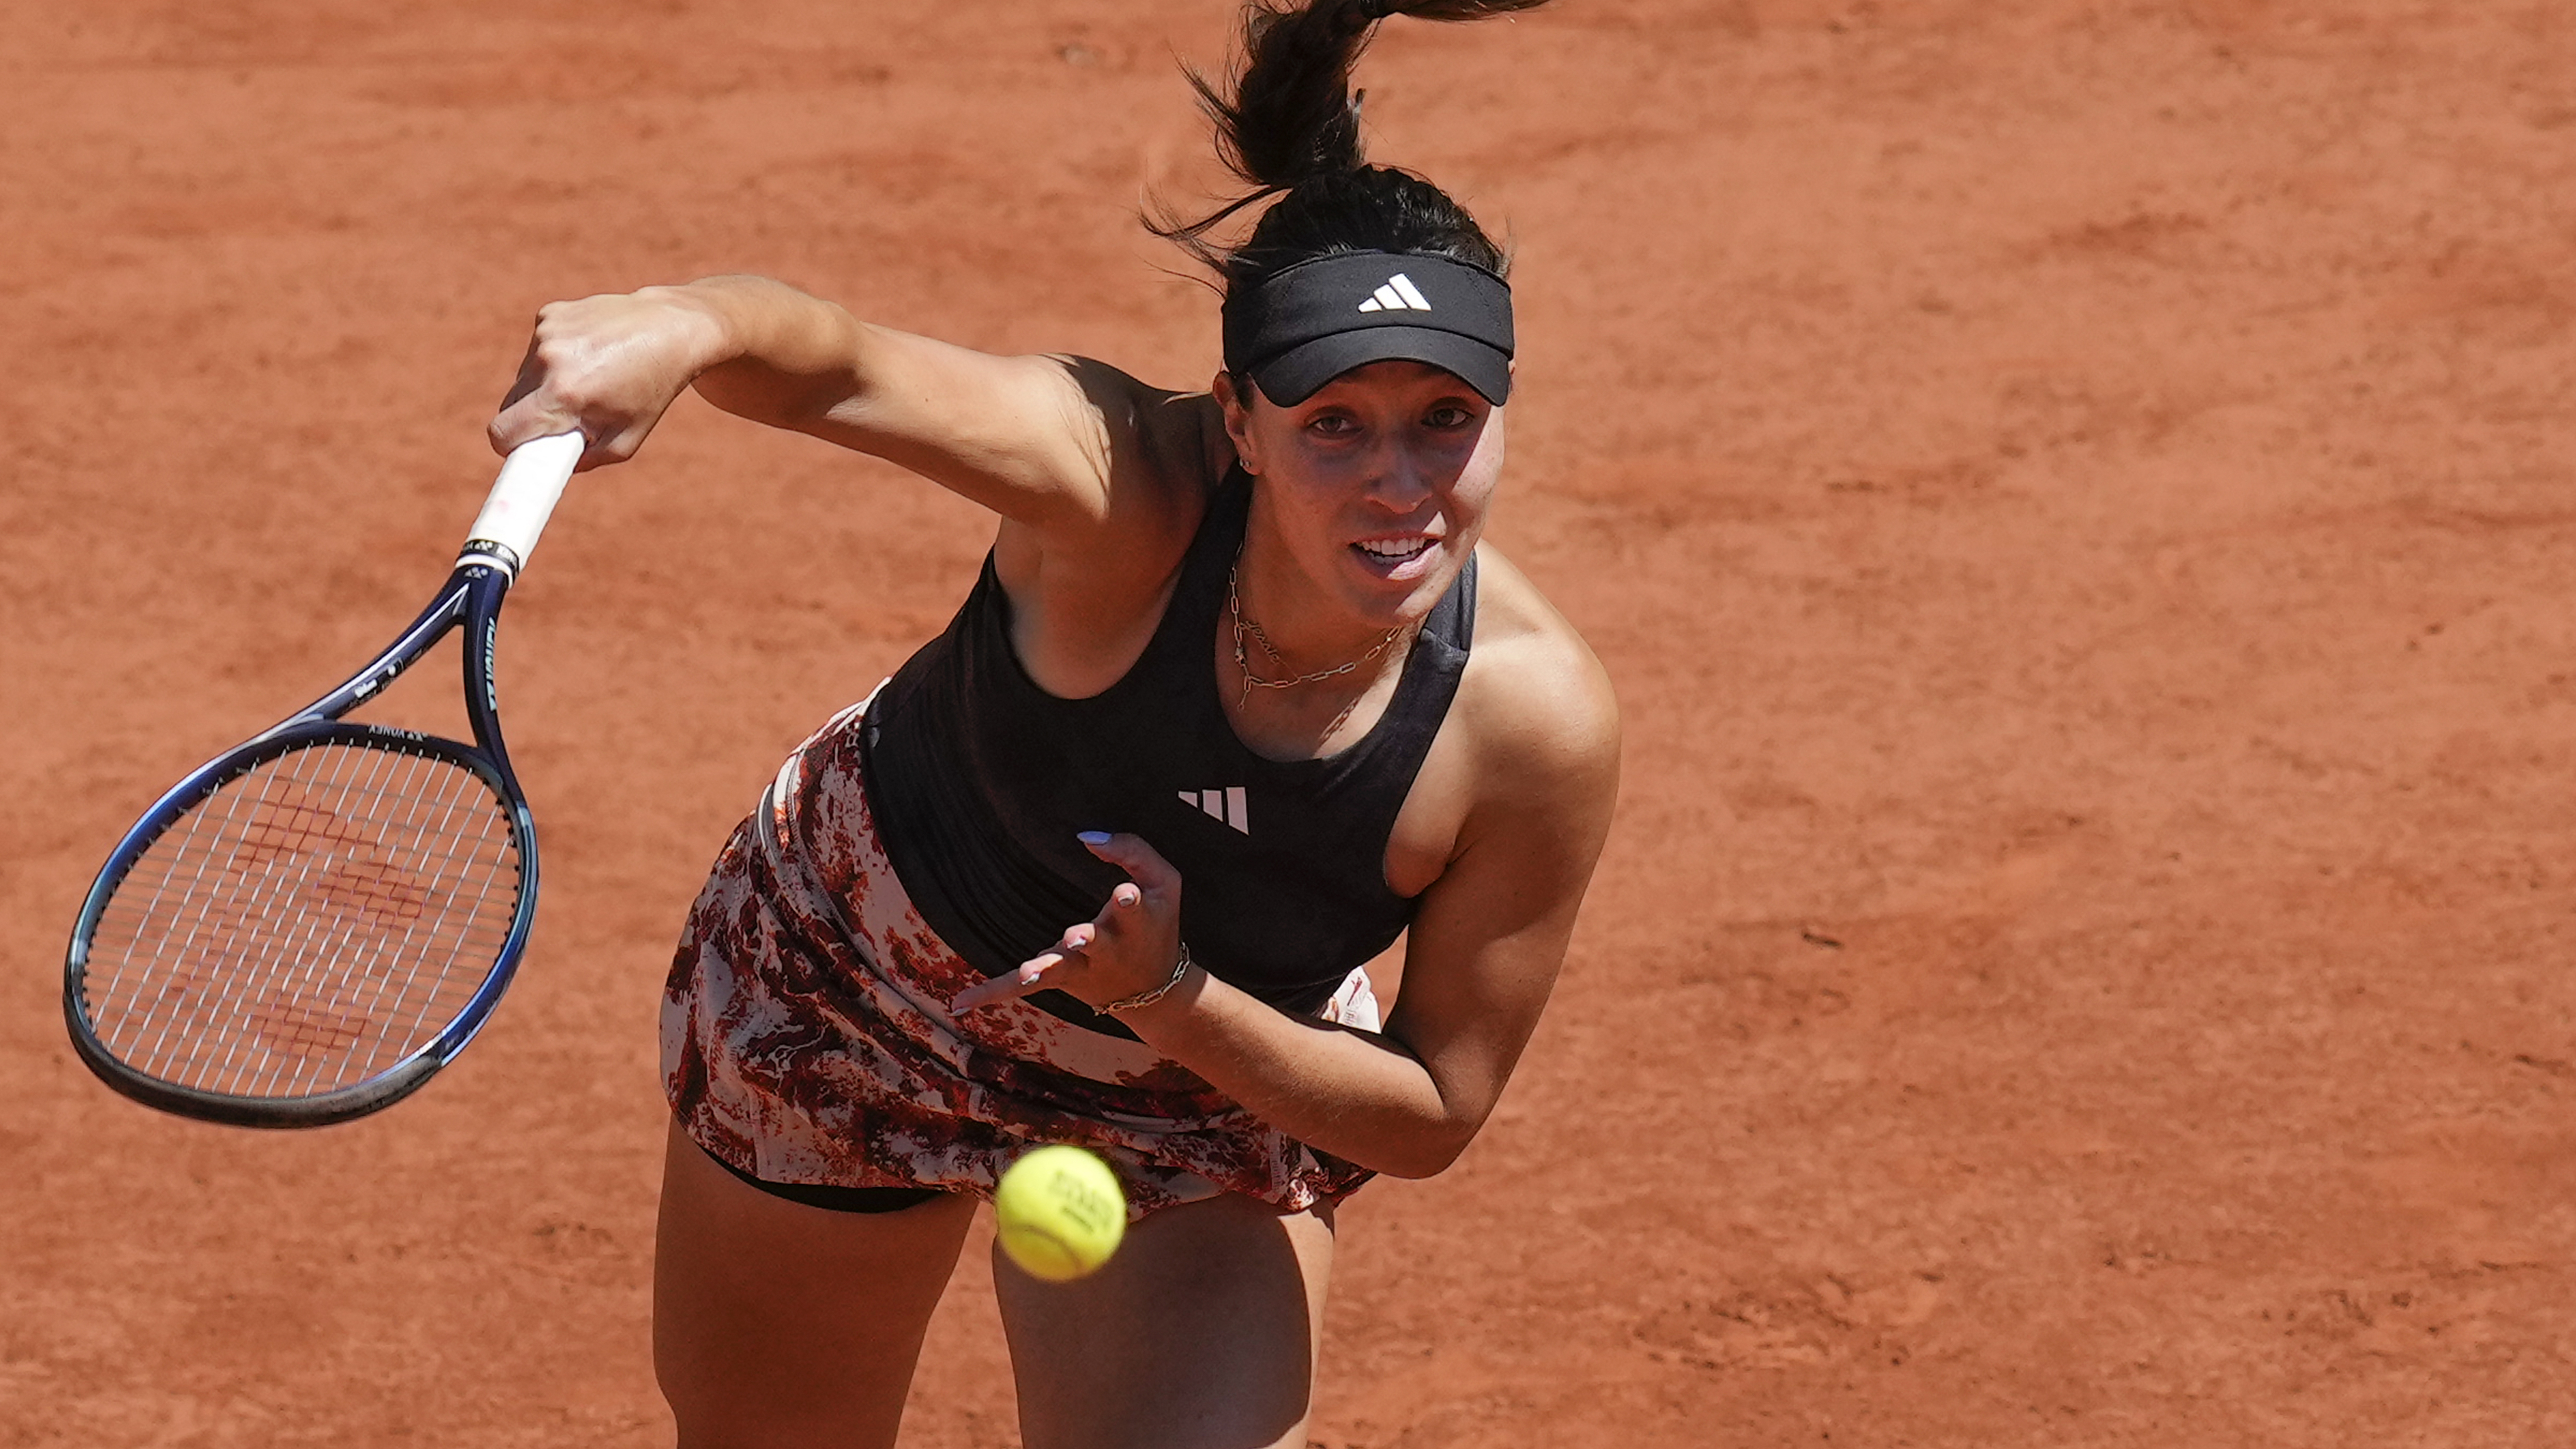 How to watch the 2023 French Open Round 3 schedule, TV channel, free live stream